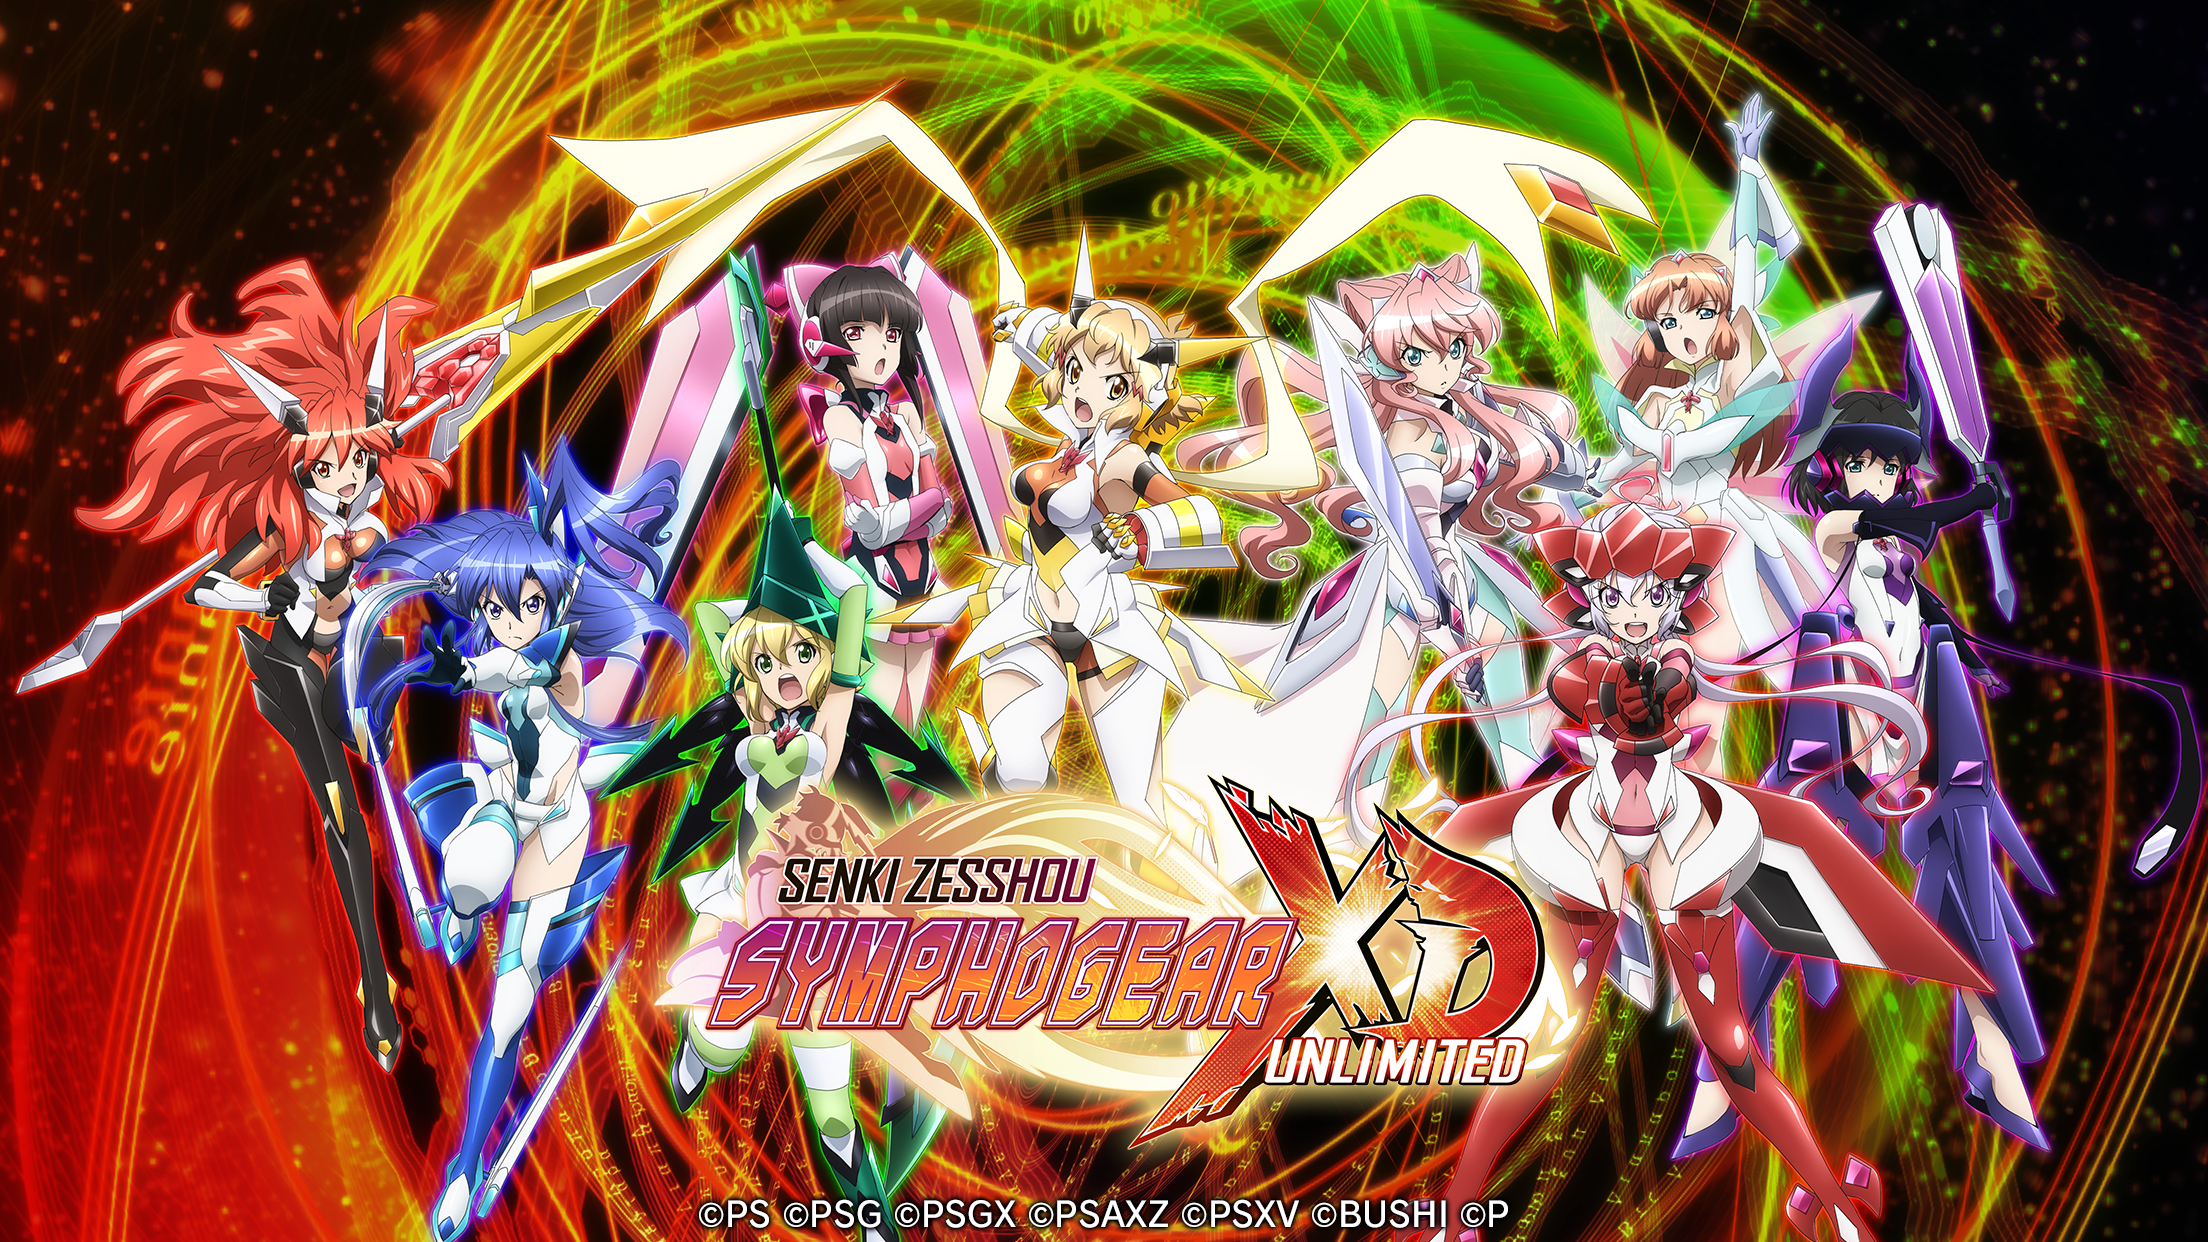 Screenshot 1 of シンフォギアXD UNLIMITED 